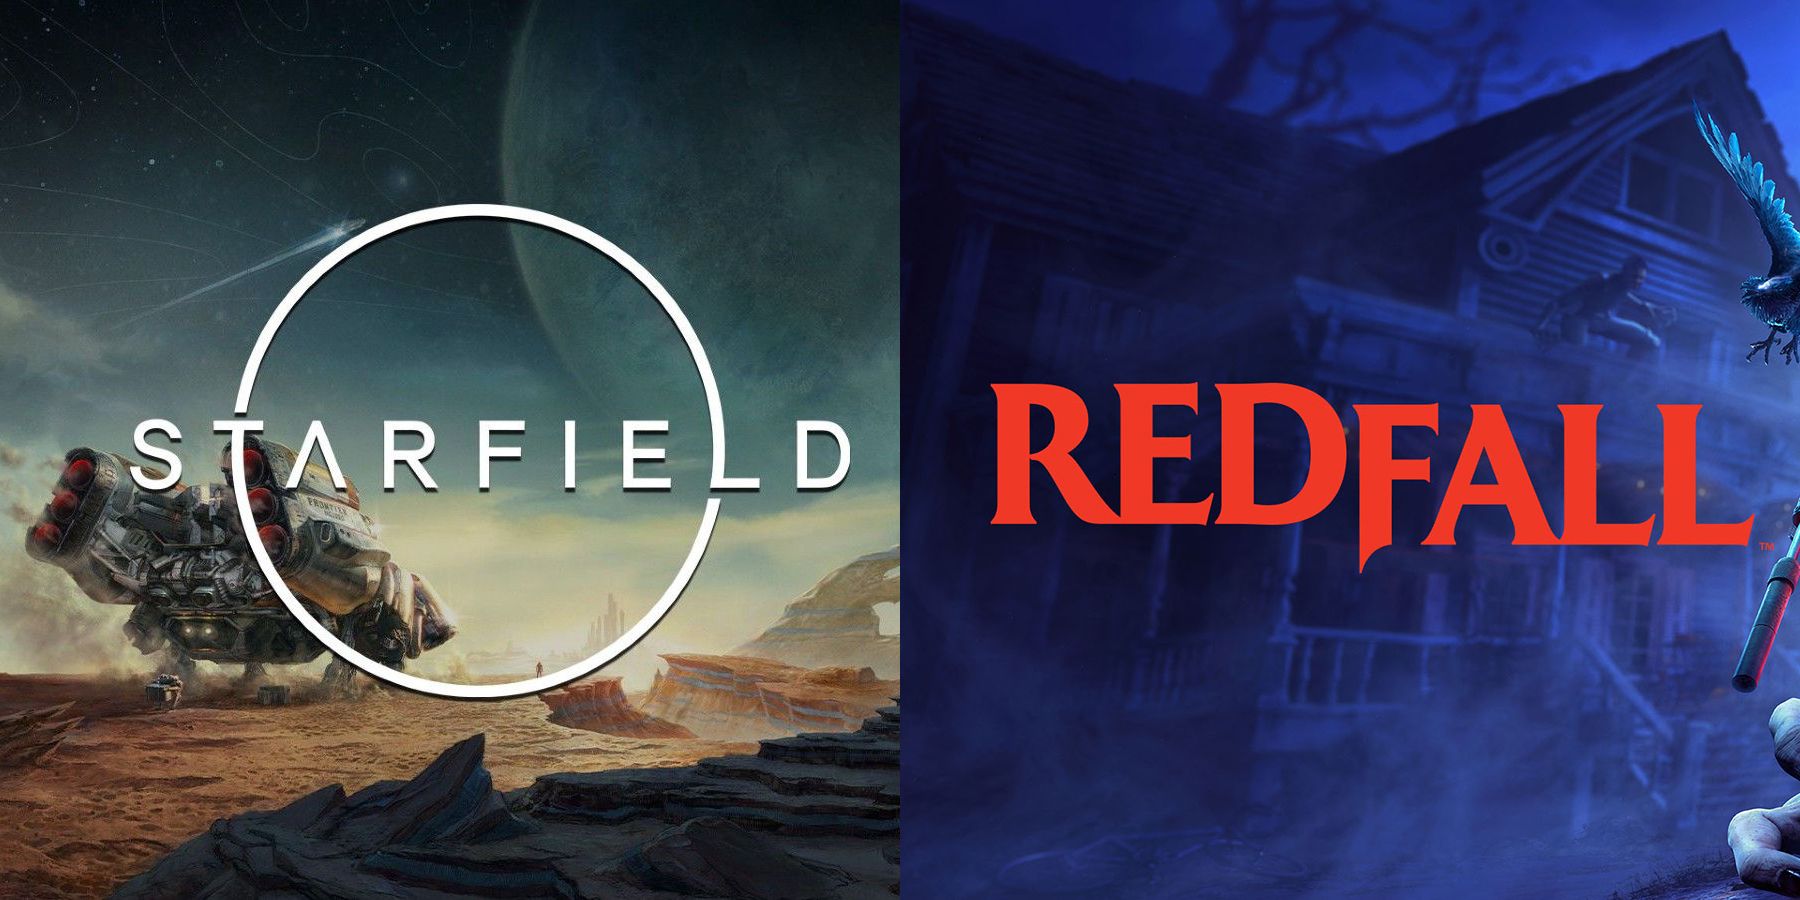 thesdas starfield and redfall have been delayed to 2023